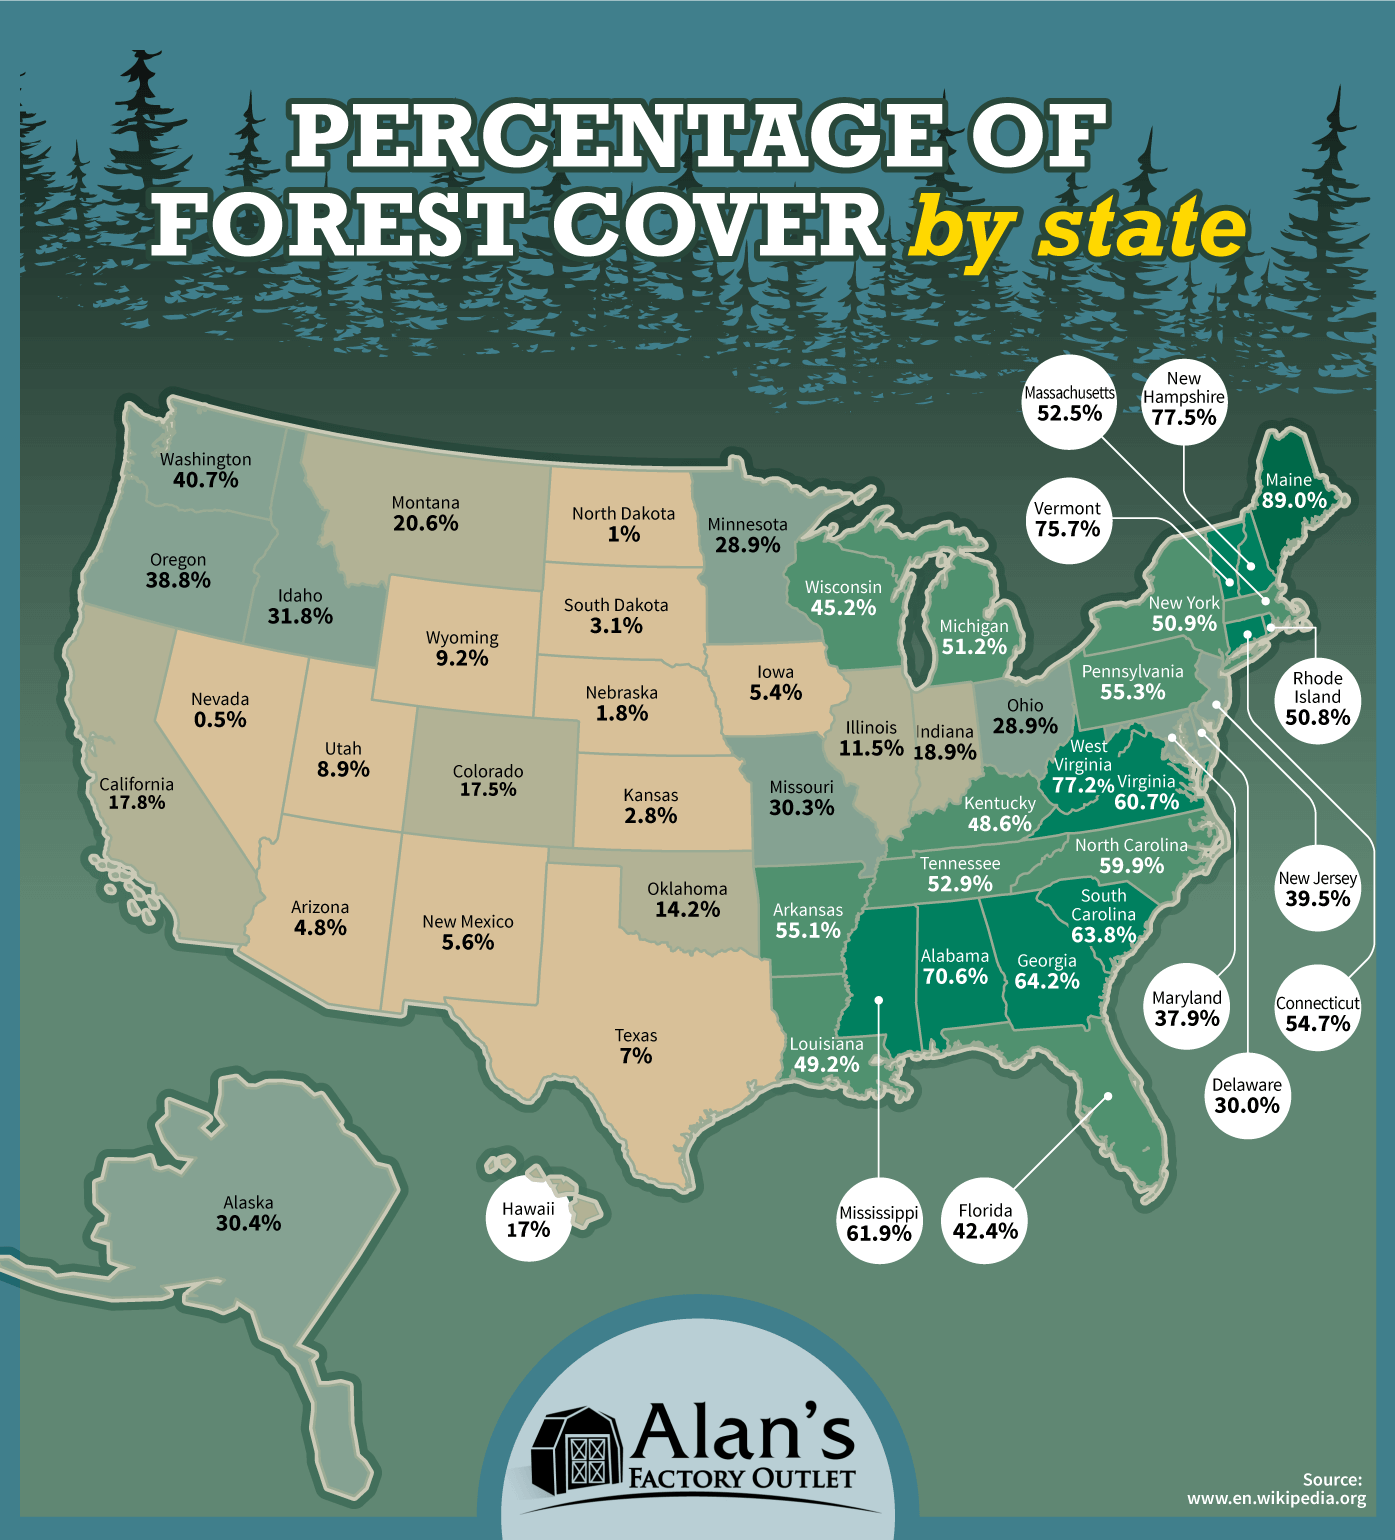 Which State Has The Highest Percentage of Forest Cover?